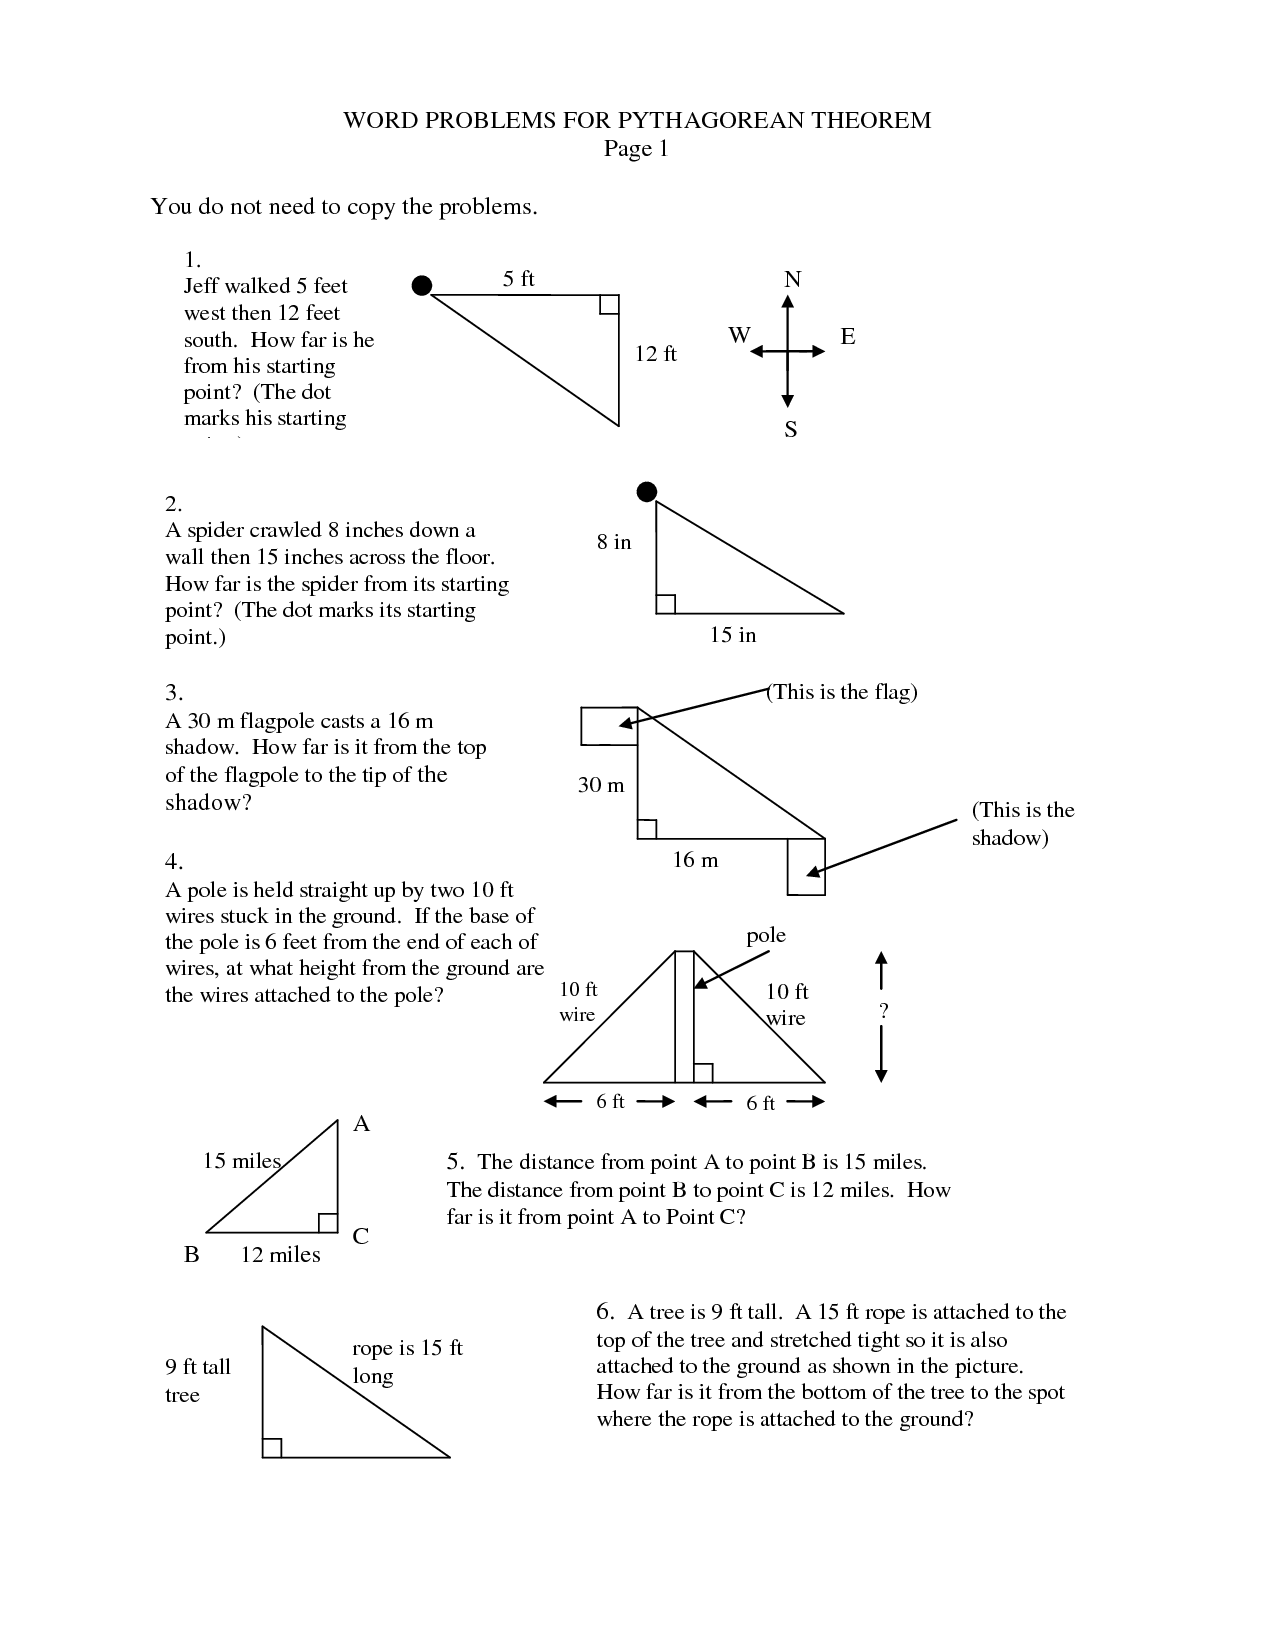 16-best-images-of-pythagorean-theorem-word-problems-worksheet-pythagorean-theorem-word